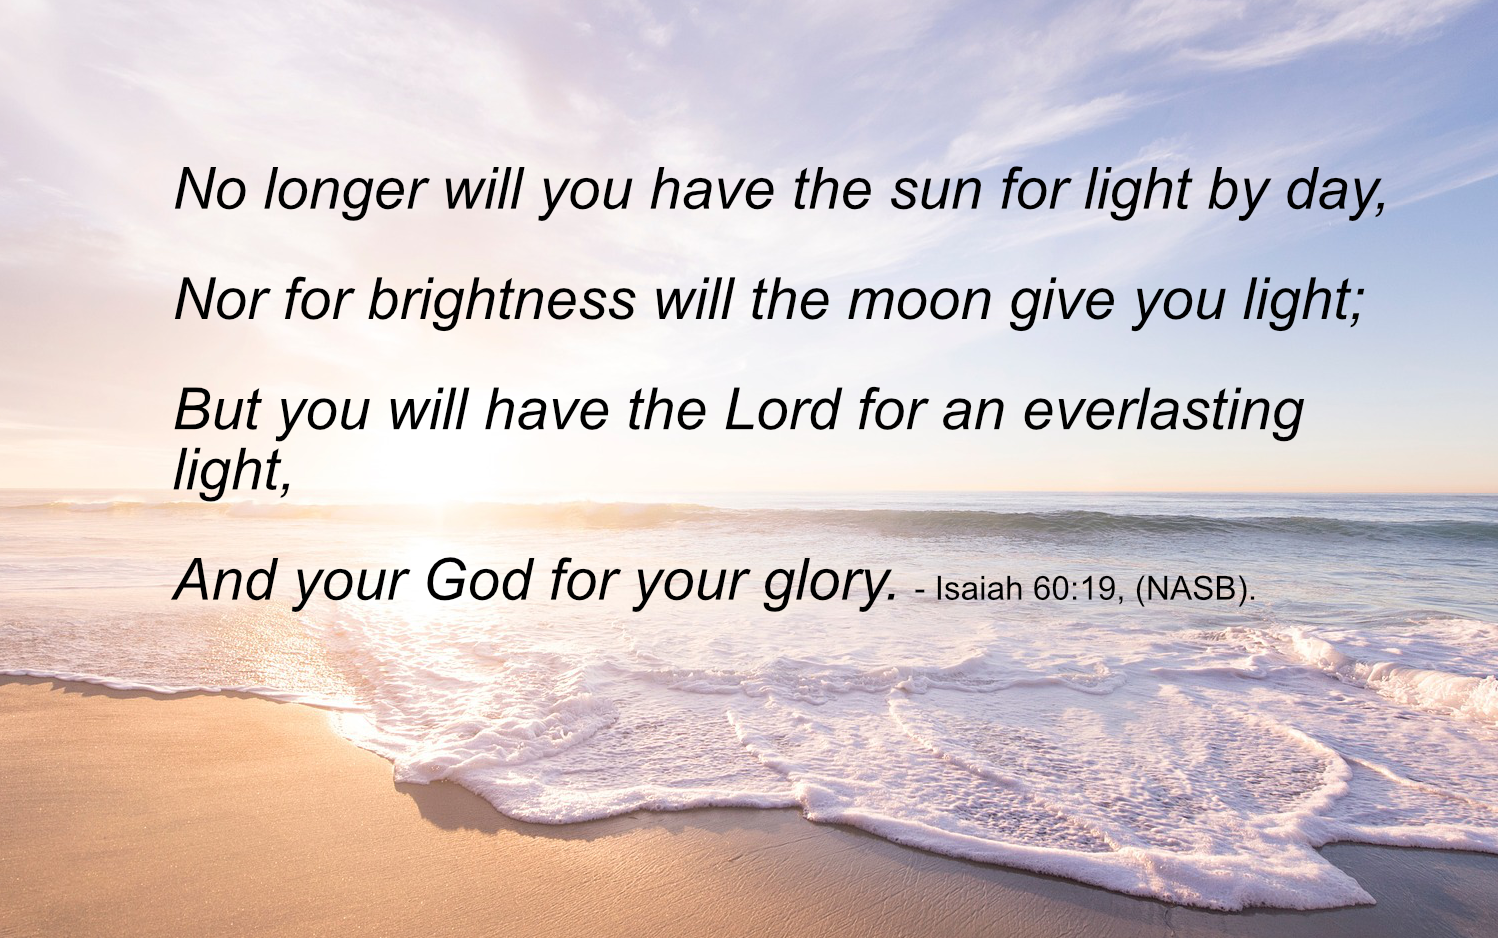 The Lord our everlasting light